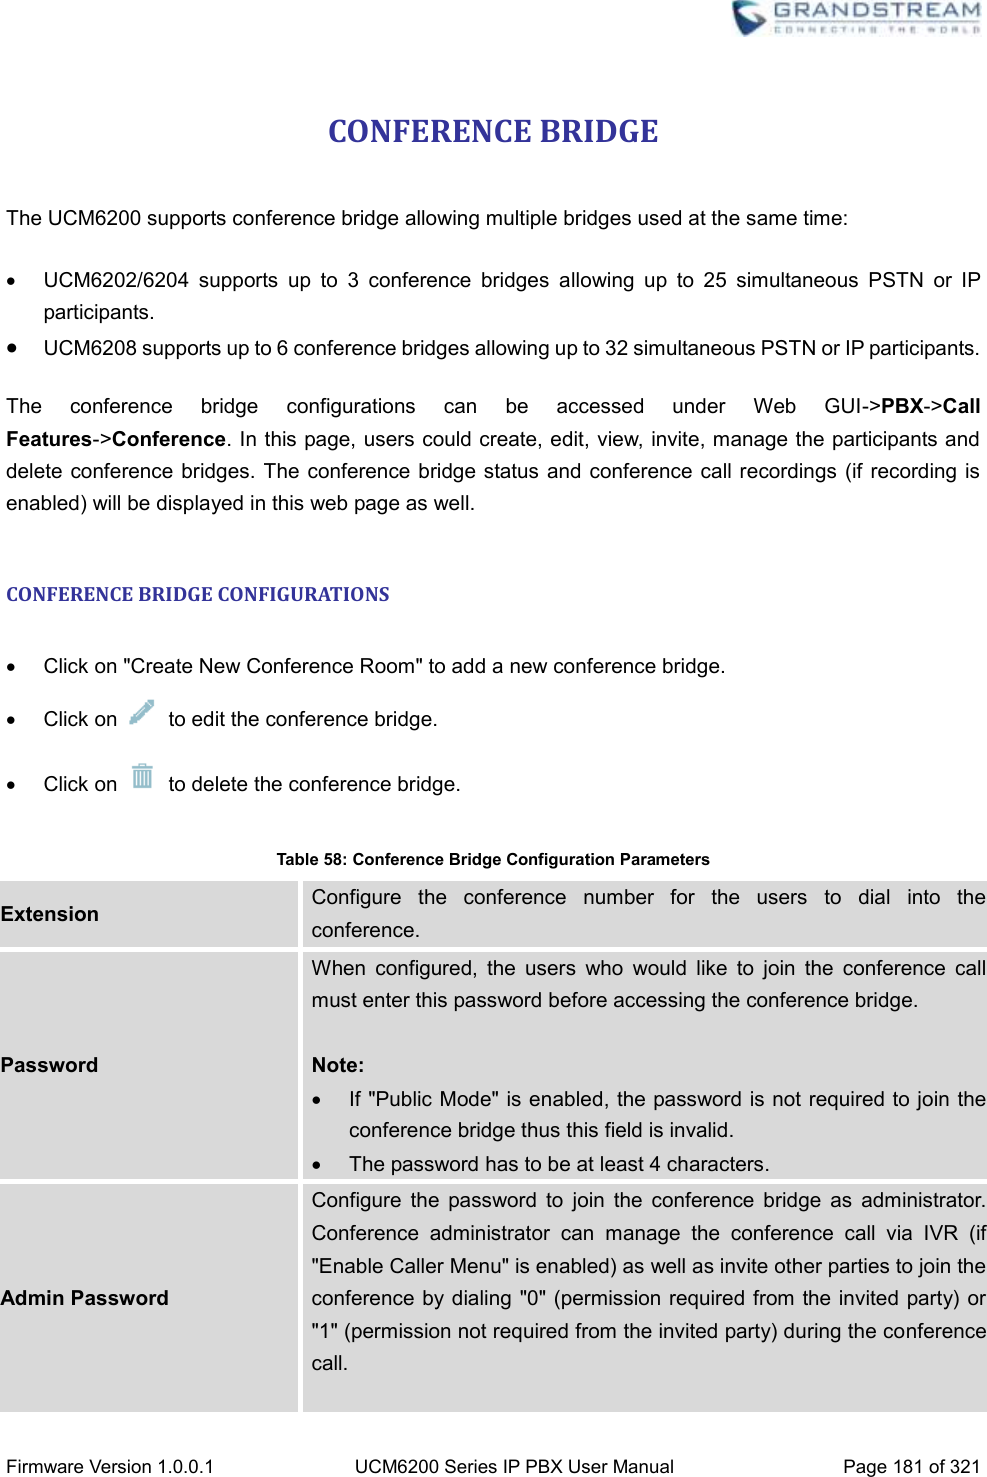  Firmware Version 1.0.0.1 UCM6200 Series IP PBX User Manual Page 181 of 321    CONFERENCE BRIDGE  The UCM6200 supports conference bridge allowing multiple bridges used at the same time:  UCM6202/6204  supports  up  to  3  conference  bridges  allowing  up  to  25  simultaneous  PSTN  or  IP participants.  UCM6208 supports up to 6 conference bridges allowing up to 32 simultaneous PSTN or IP participants. The  conference  bridge  configurations  can  be  accessed  under  Web  GUI-&gt;PBX-&gt;Call Features-&gt;Conference. In this page, users could create, edit, view, invite, manage the participants and delete conference  bridges. The conference bridge status and conference call recordings  (if recording is enabled) will be displayed in this web page as well.  CONFERENCE BRIDGE CONFIGURATIONS    Click on &quot;Create New Conference Room&quot; to add a new conference bridge.   Click on    to edit the conference bridge.   Click on    to delete the conference bridge.    Table 58: Conference Bridge Configuration Parameters Extension Configure  the  conference  number  for  the  users  to  dial  into  the conference. Password When  configured,  the  users  who  would  like  to  join  the  conference  call must enter this password before accessing the conference bridge.  Note:   If &quot;Public Mode&quot; is enabled, the password is not required to join the conference bridge thus this field is invalid.   The password has to be at least 4 characters. Admin Password Configure  the  password  to  join  the  conference  bridge  as  administrator. Conference  administrator  can  manage  the  conference  call  via  IVR  (if &quot;Enable Caller Menu&quot; is enabled) as well as invite other parties to join the conference by dialing &quot;0&quot; (permission required from the invited party) or &quot;1&quot; (permission not required from the invited party) during the conference call.  